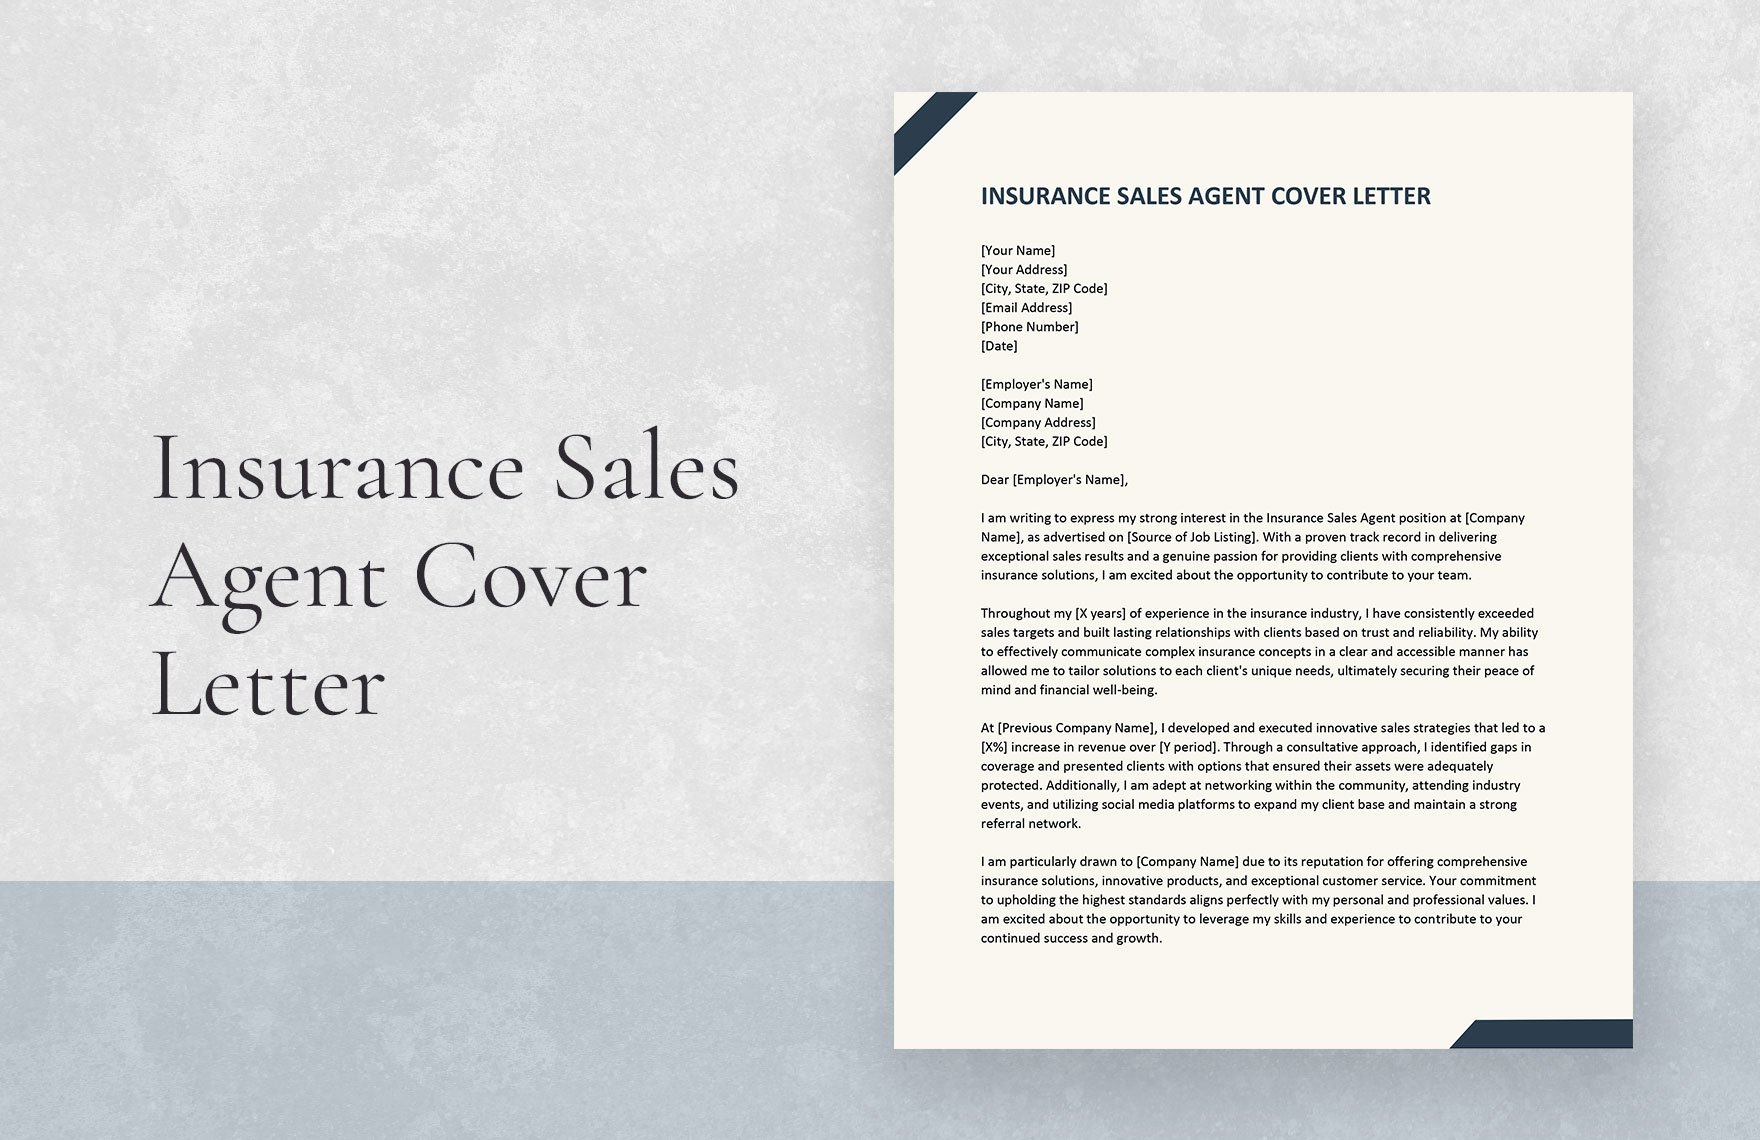 Insurance Sales Agent Cover Letter